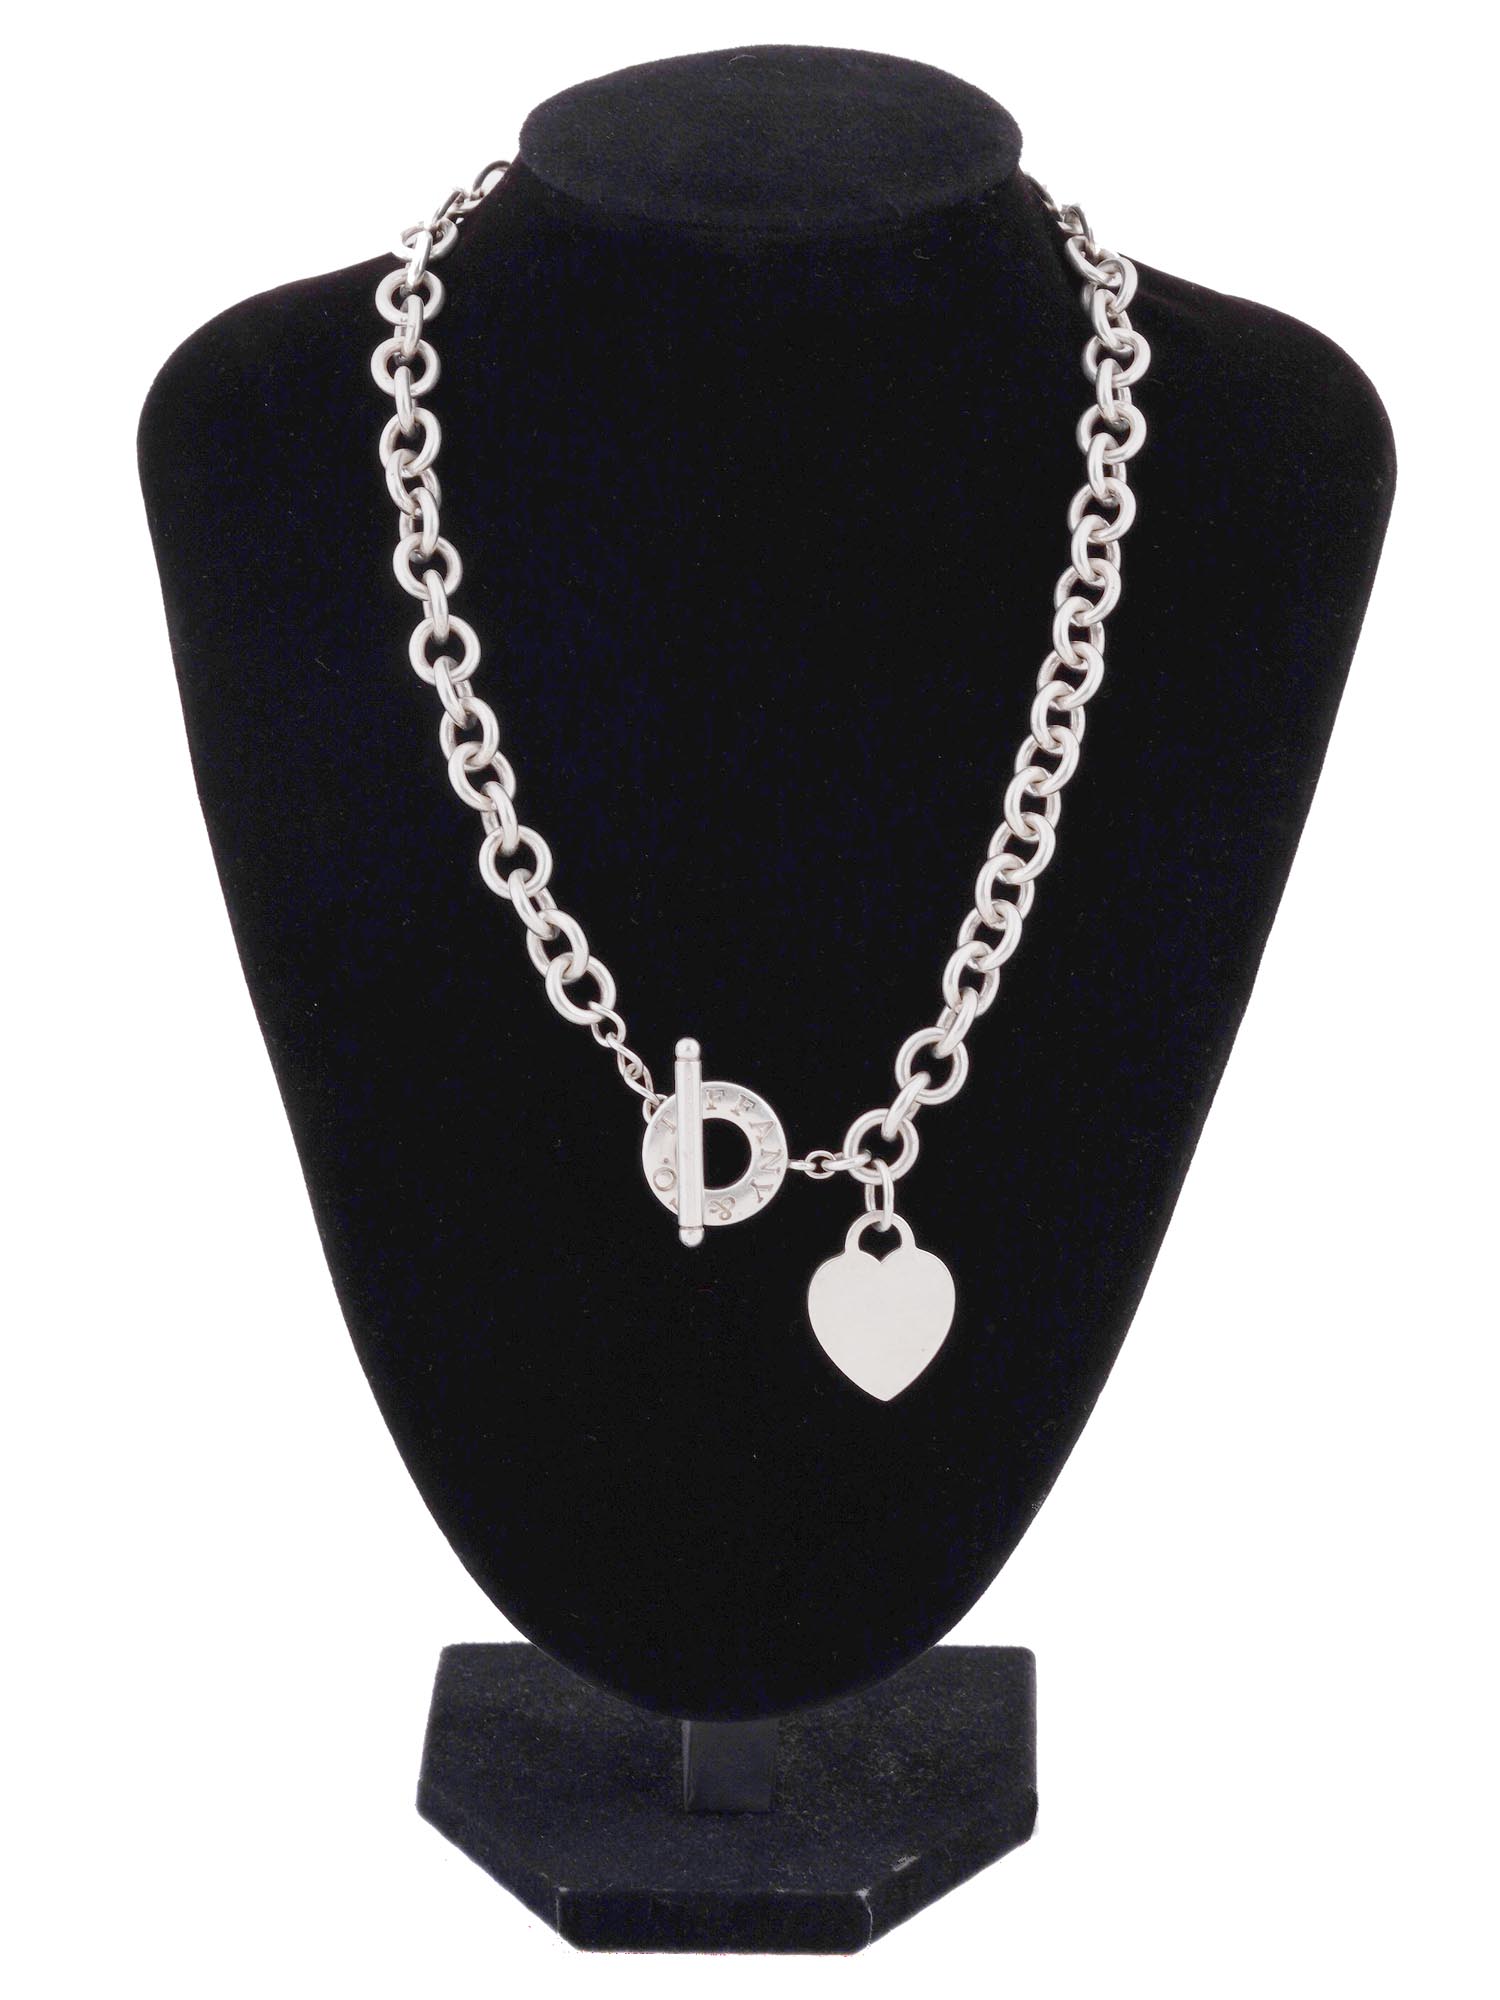 TIFFANY STERLING SILVER NECKLACE WITH HEART CHARM PIC-2